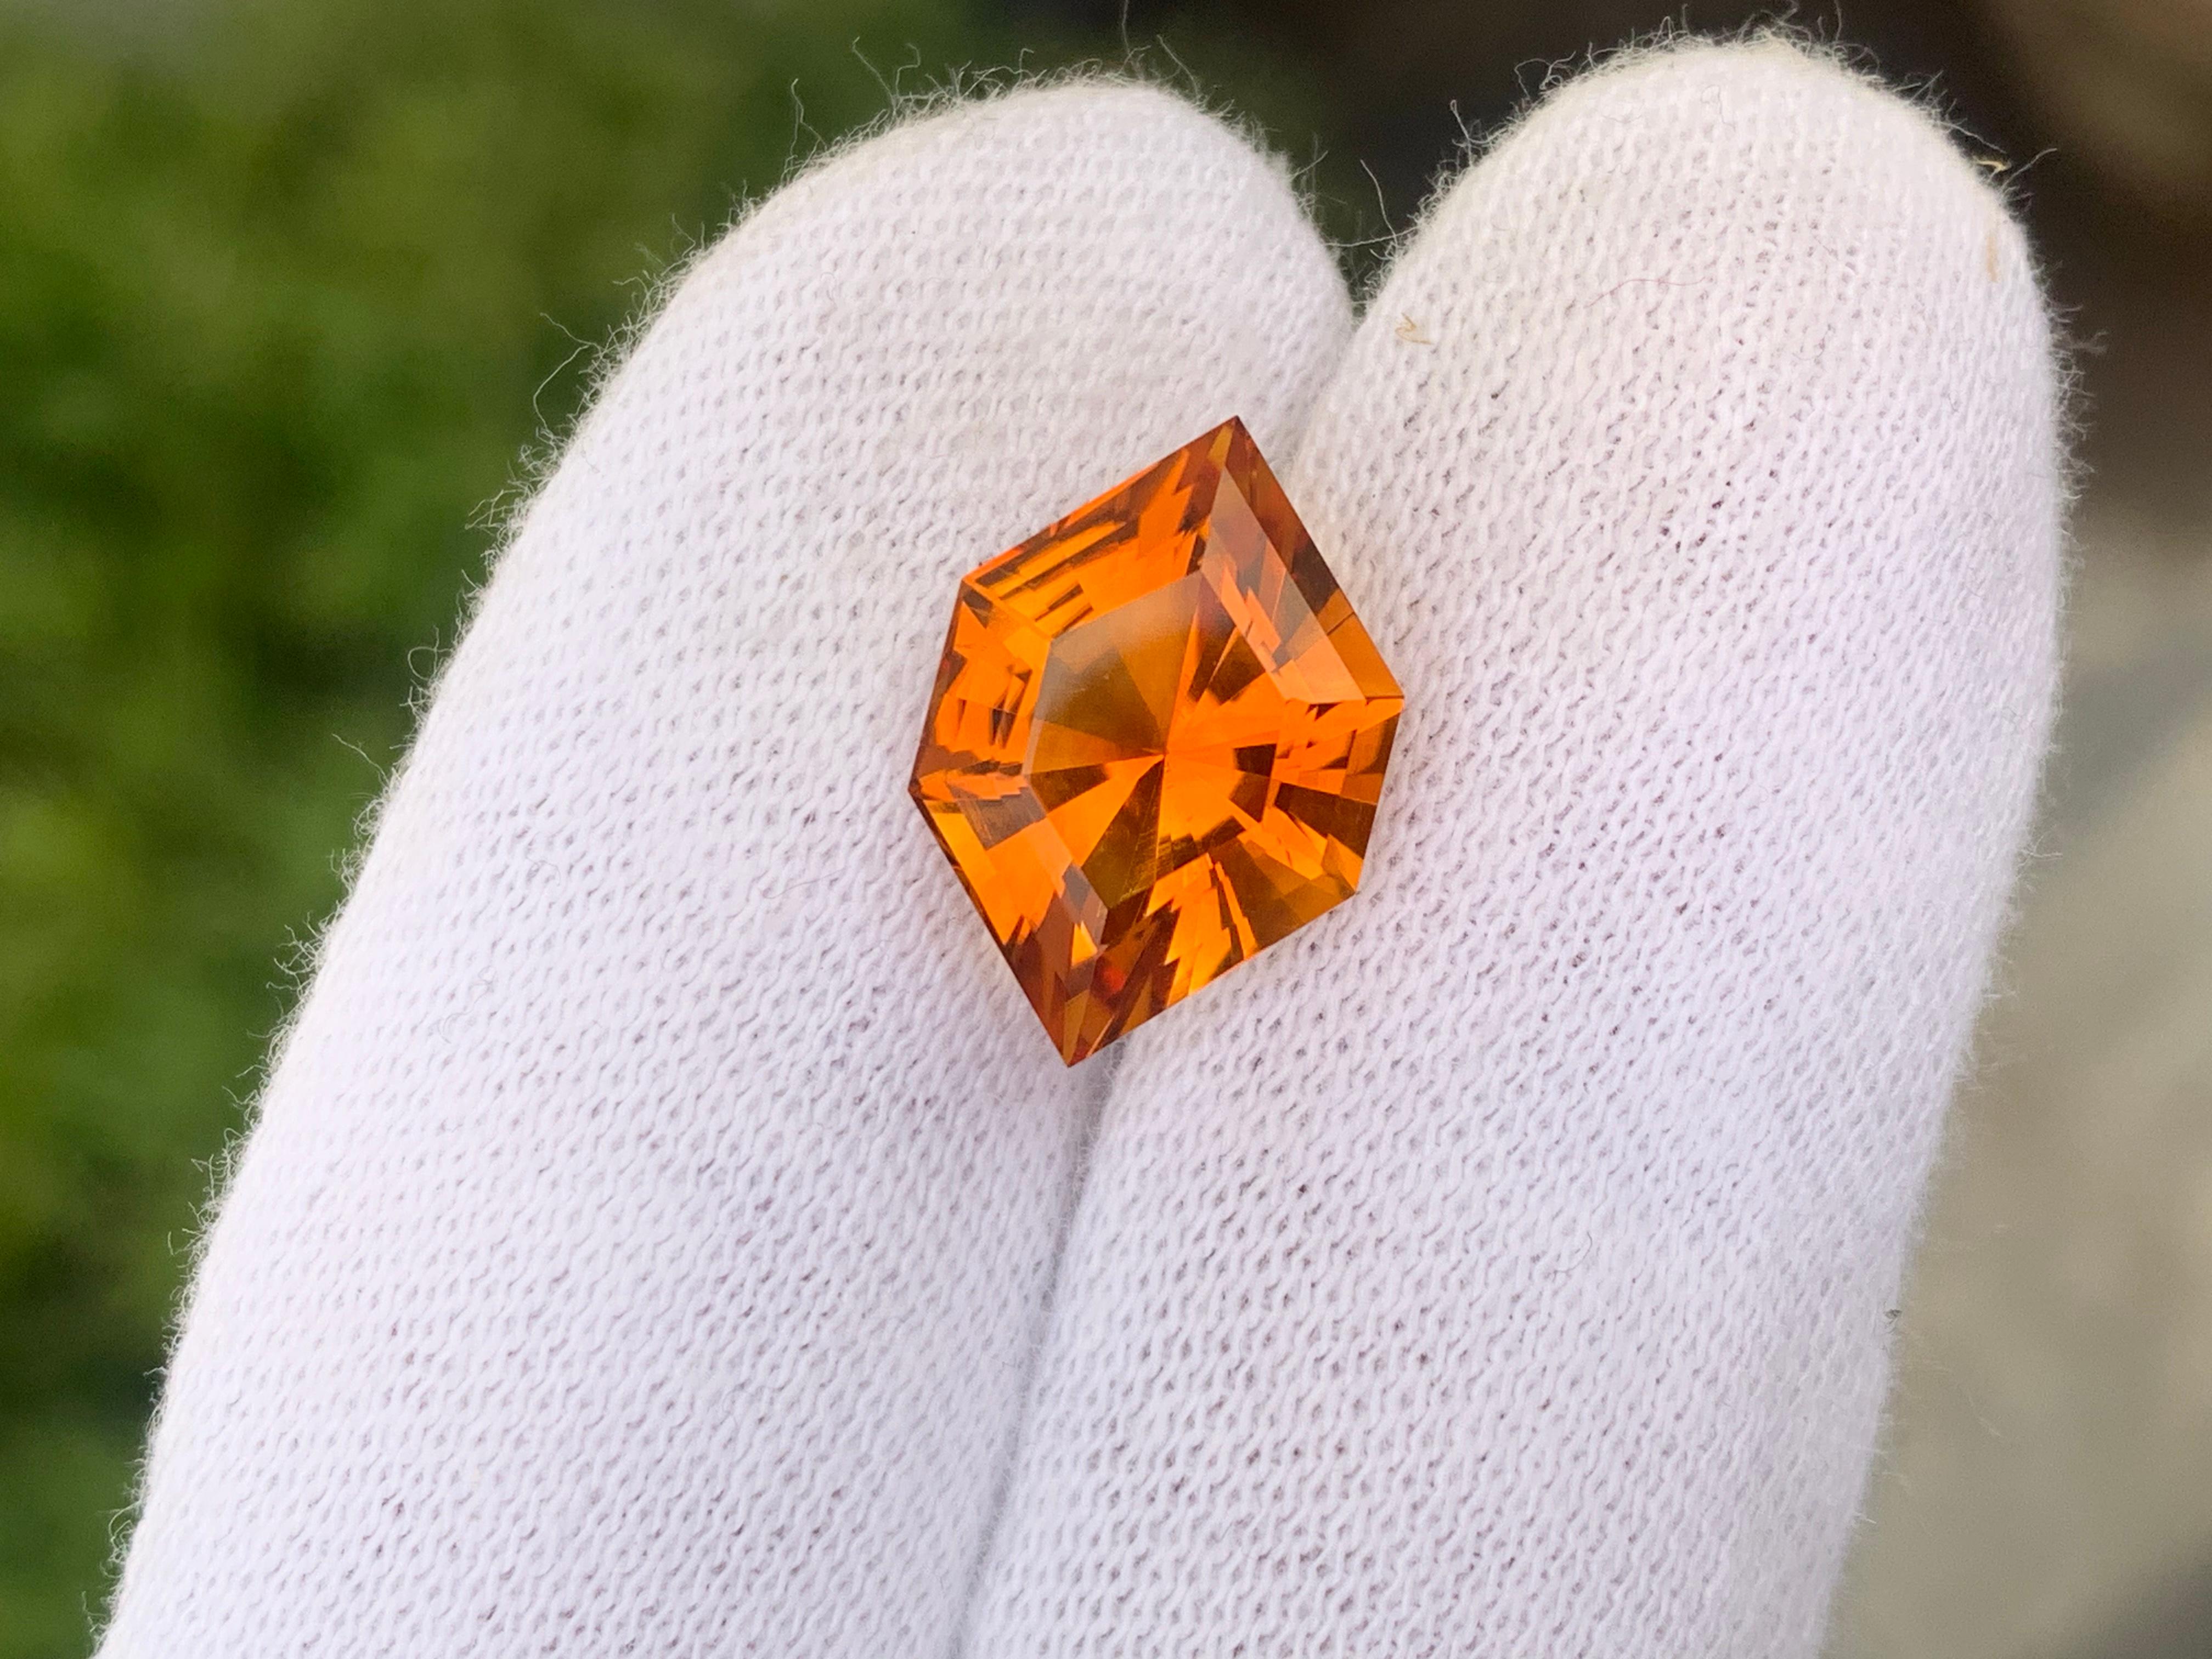 Faceted Mandarin Citrine
Weight : 7.0 Carats
Dimensions : 16.4x11.2x8.5 Mm
Clarity : Loupe Clean 
Origin : Brazil
Color: Orange 
Shape: Hexagon
Certificate: On Demand
Month: November
.
The Many Healing Properties of Citrine
Increase Optimism, And